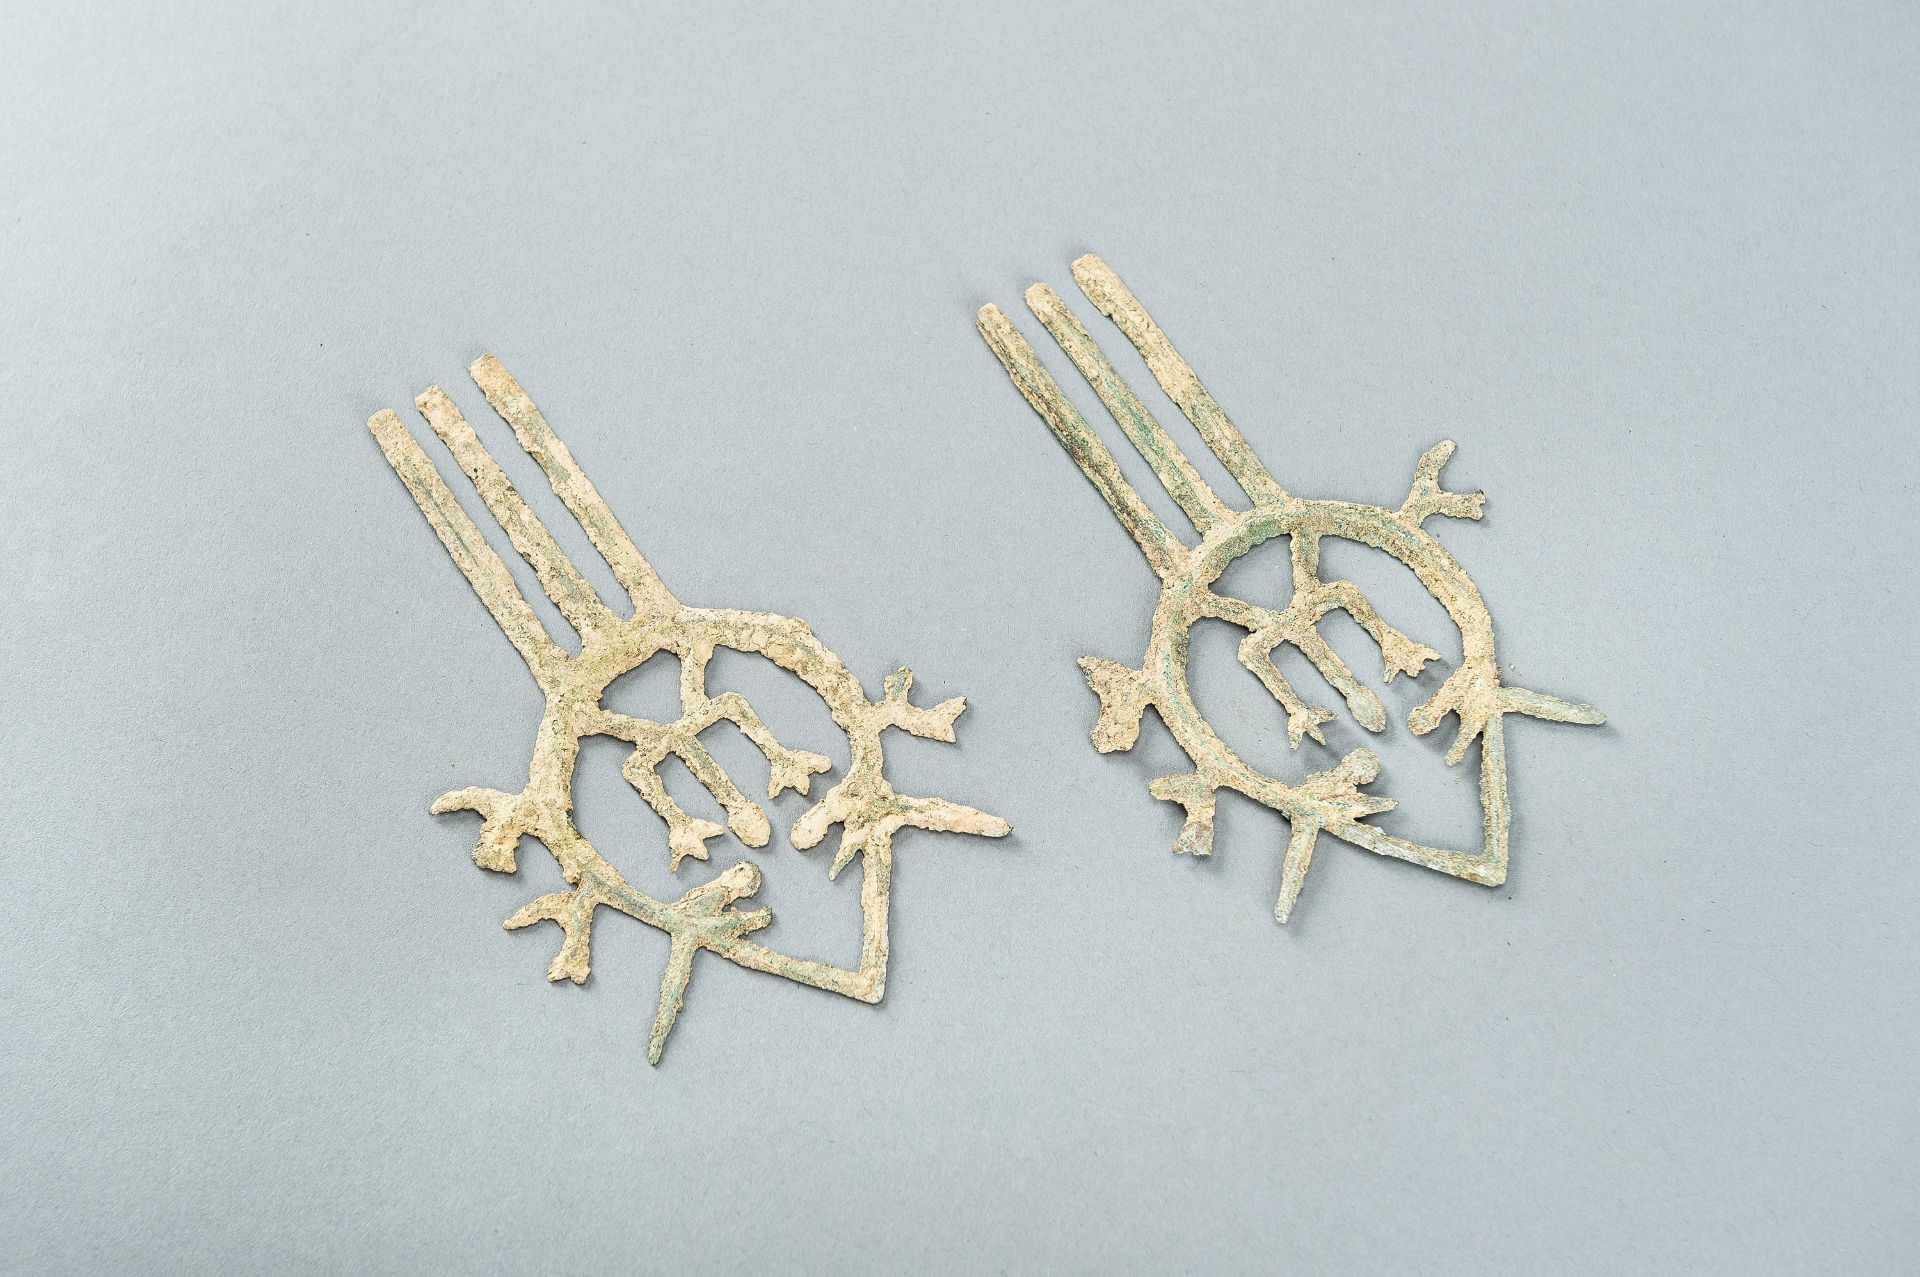 A PAIR OF BRONZE HAIRPINS, DONG SON CULTURE - Image 11 of 11